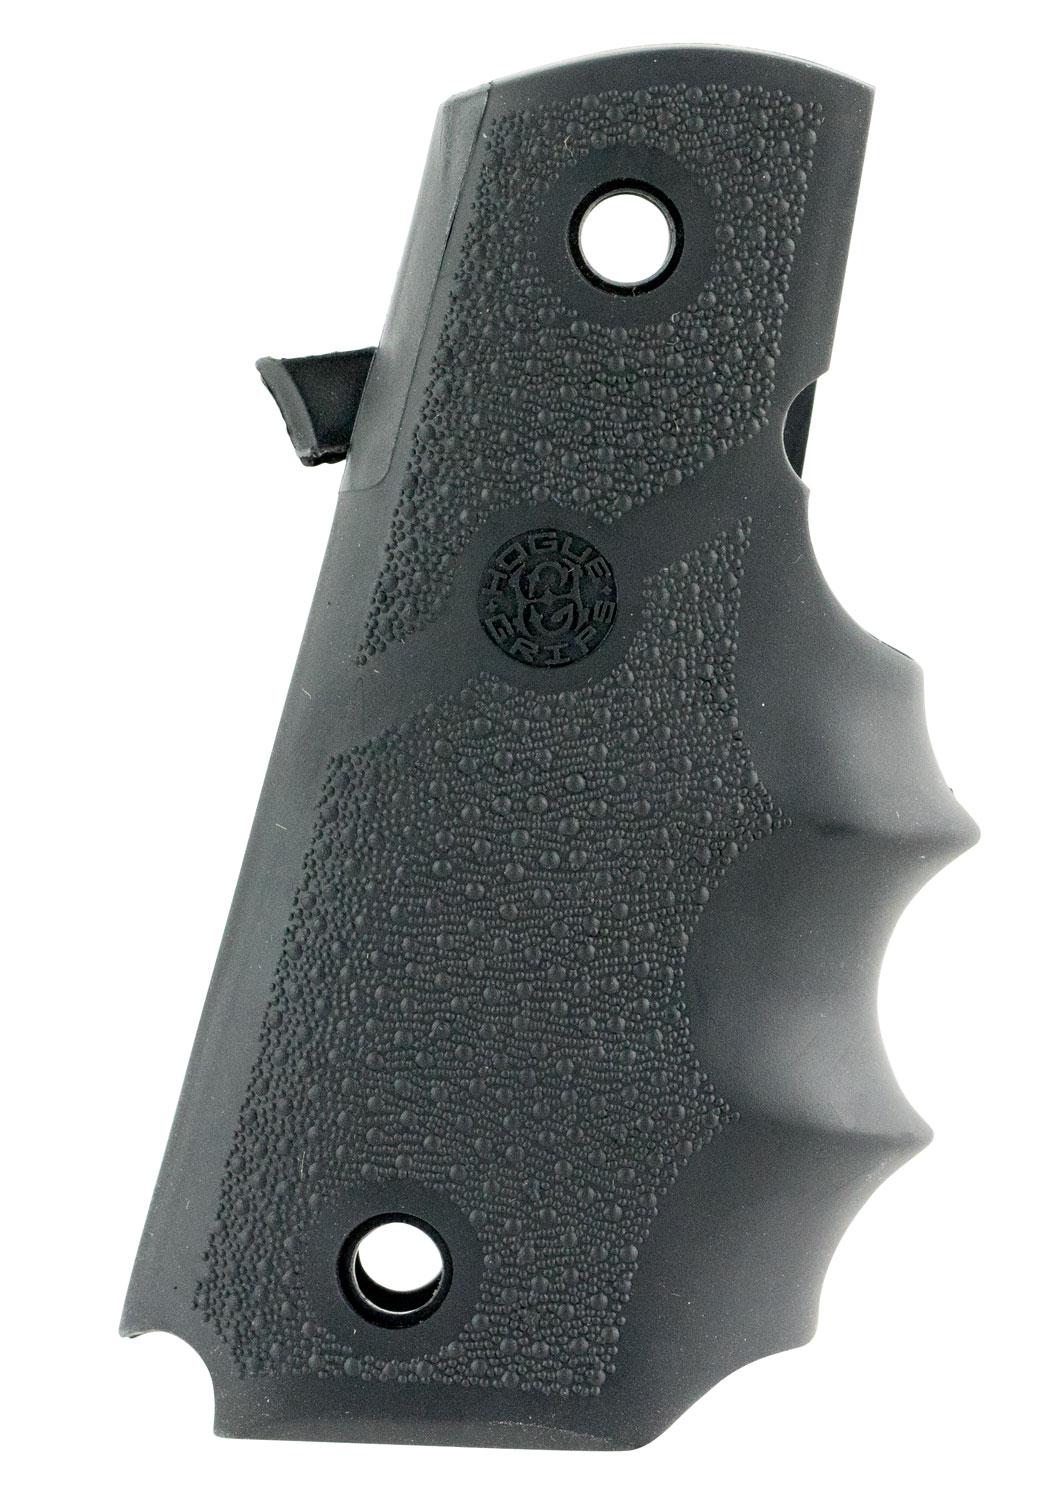 Hogue 14000 Rubber Grip  Black Rubber with Finger Grooves for Para Ordnance P-14